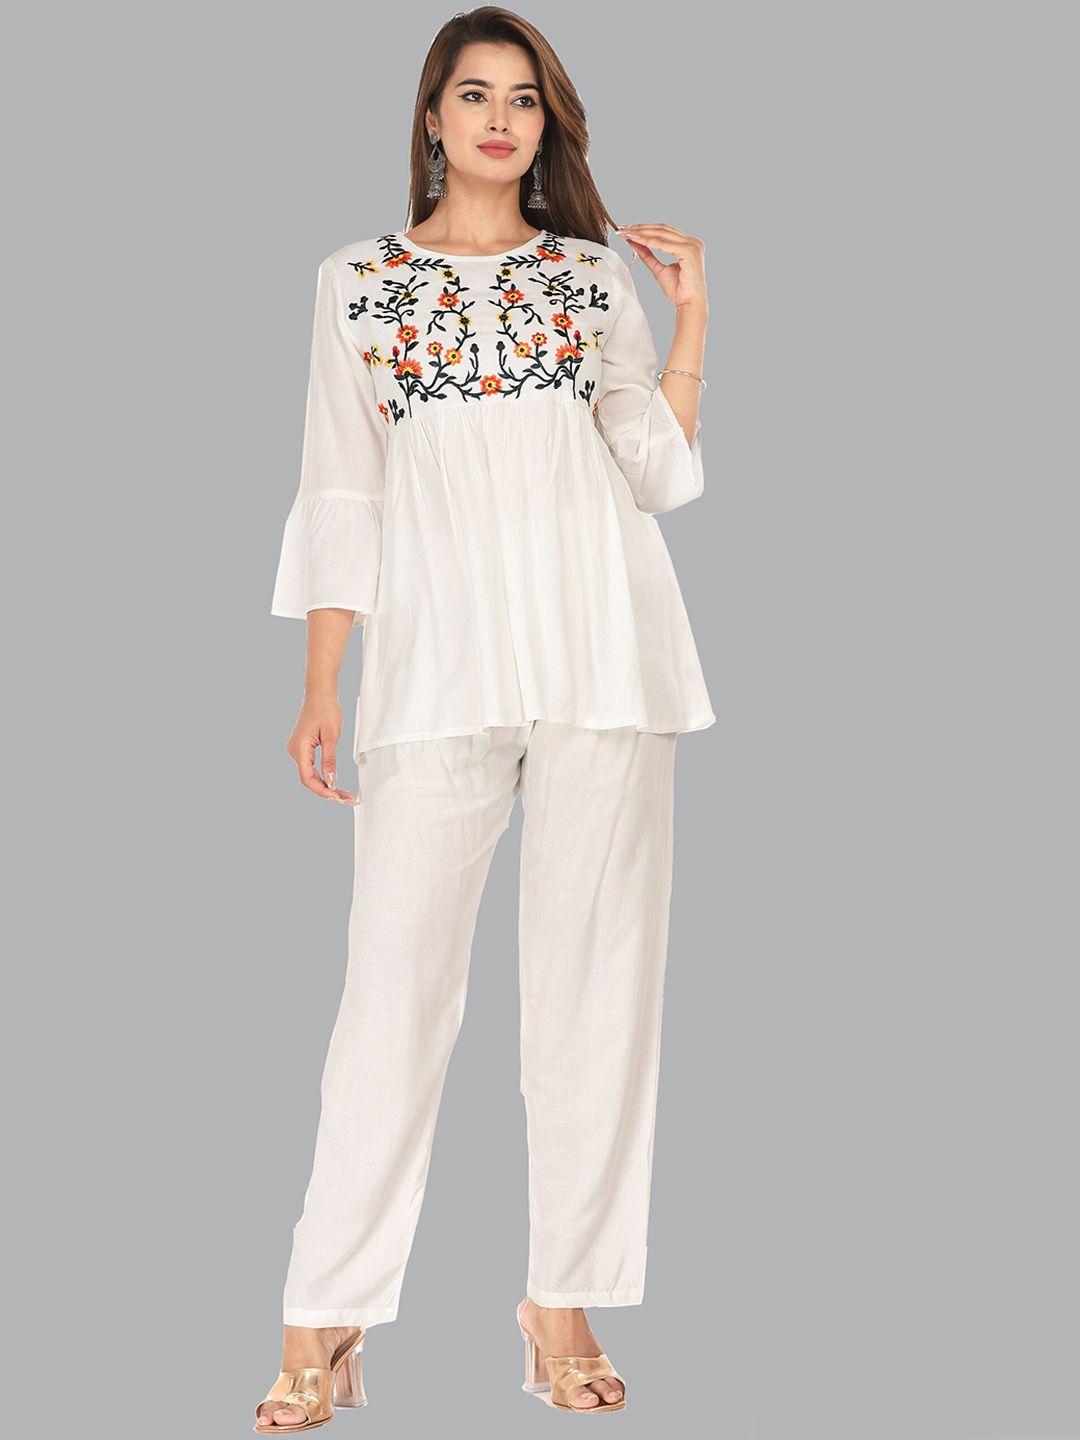 baesd floral embroidered bell sleeves a-line kurti & trousers